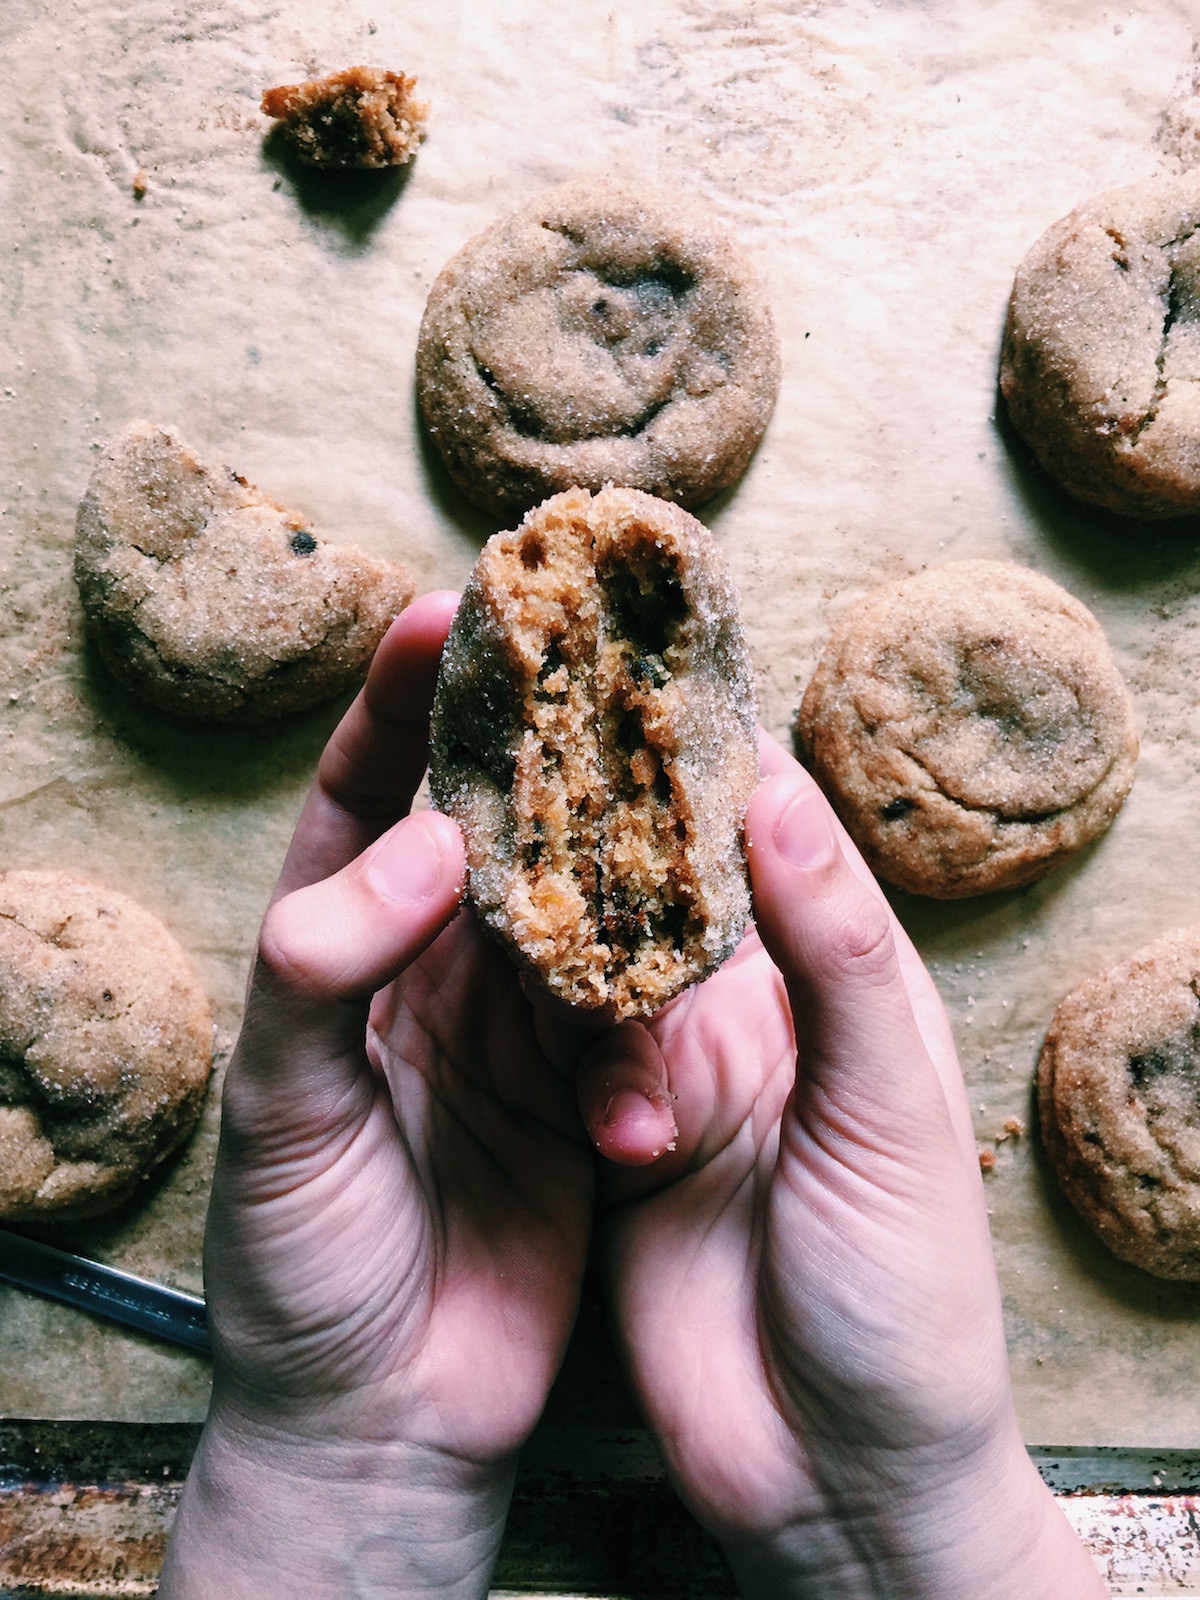 brown butter muscovado snickerdoodles | Recipe via DisplacedHousewife | Soft + chewy with a nice sugar-spice crust on the exterior. Our new favorite cookie!